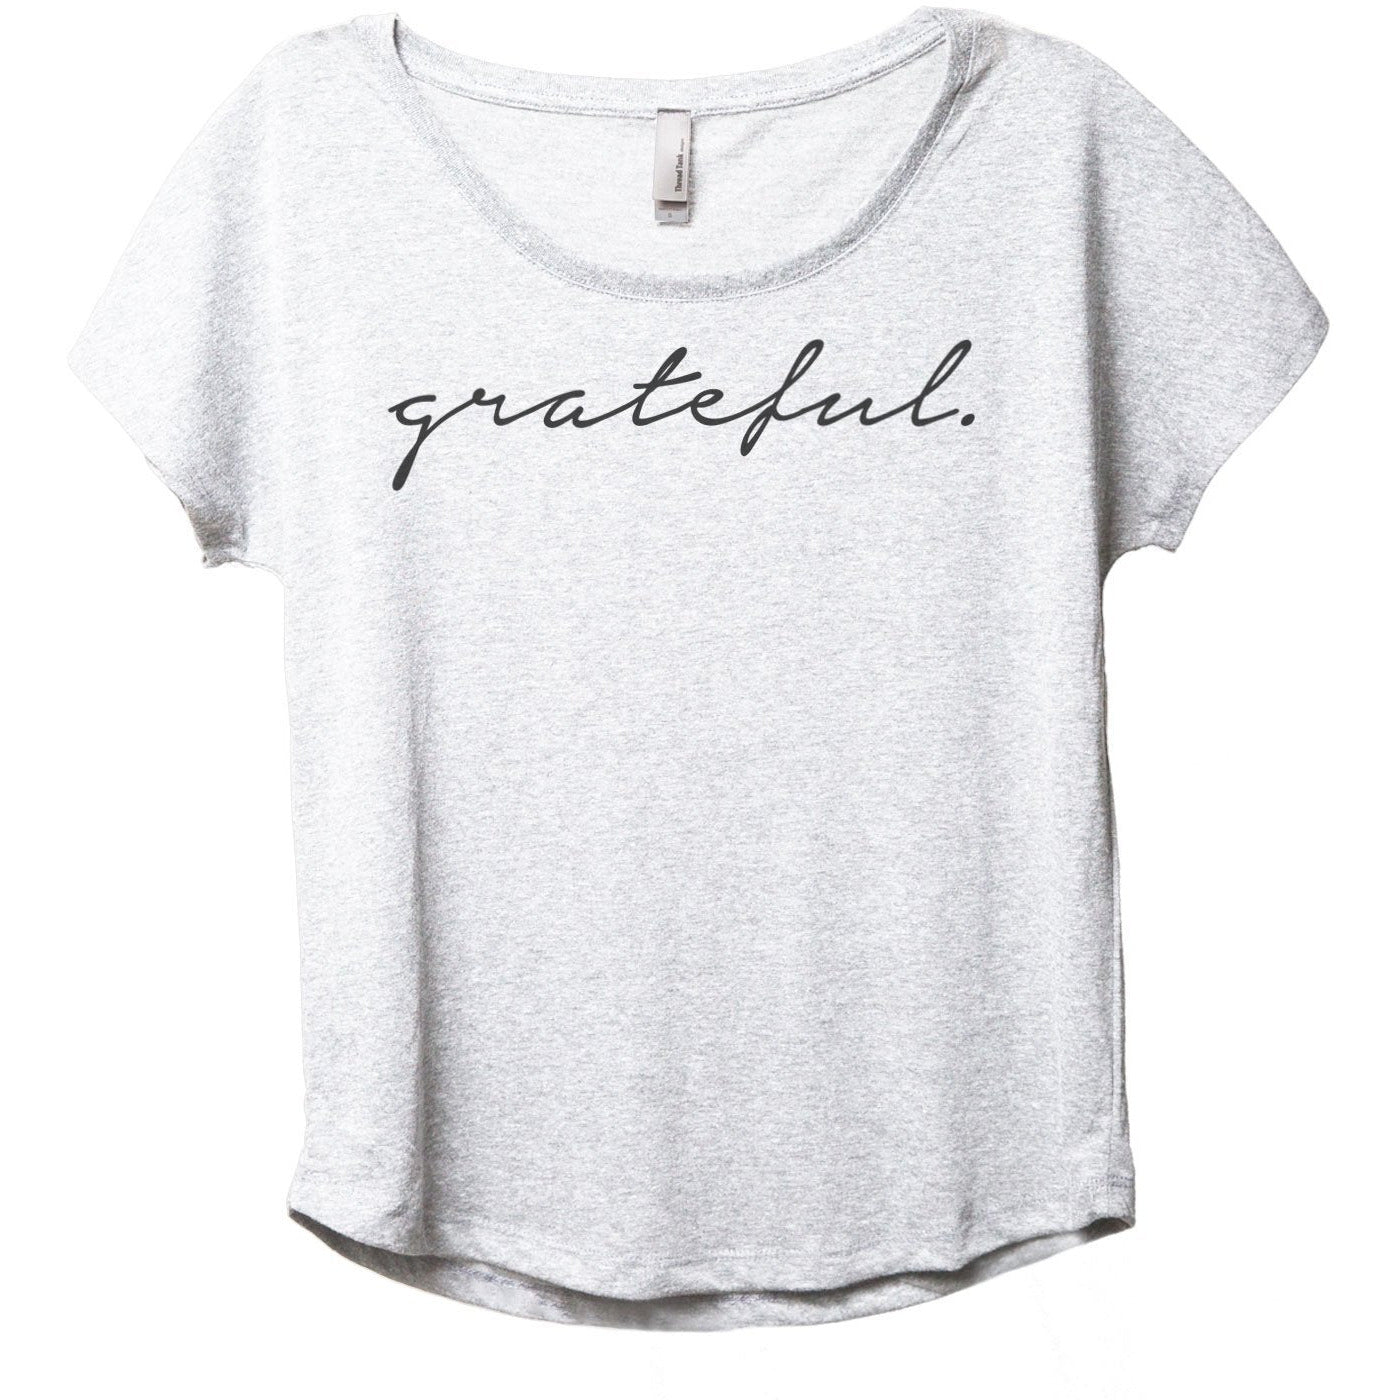 Grateful Women's Relaxed Slouchy Dolman T-Shirt Tee Heather White